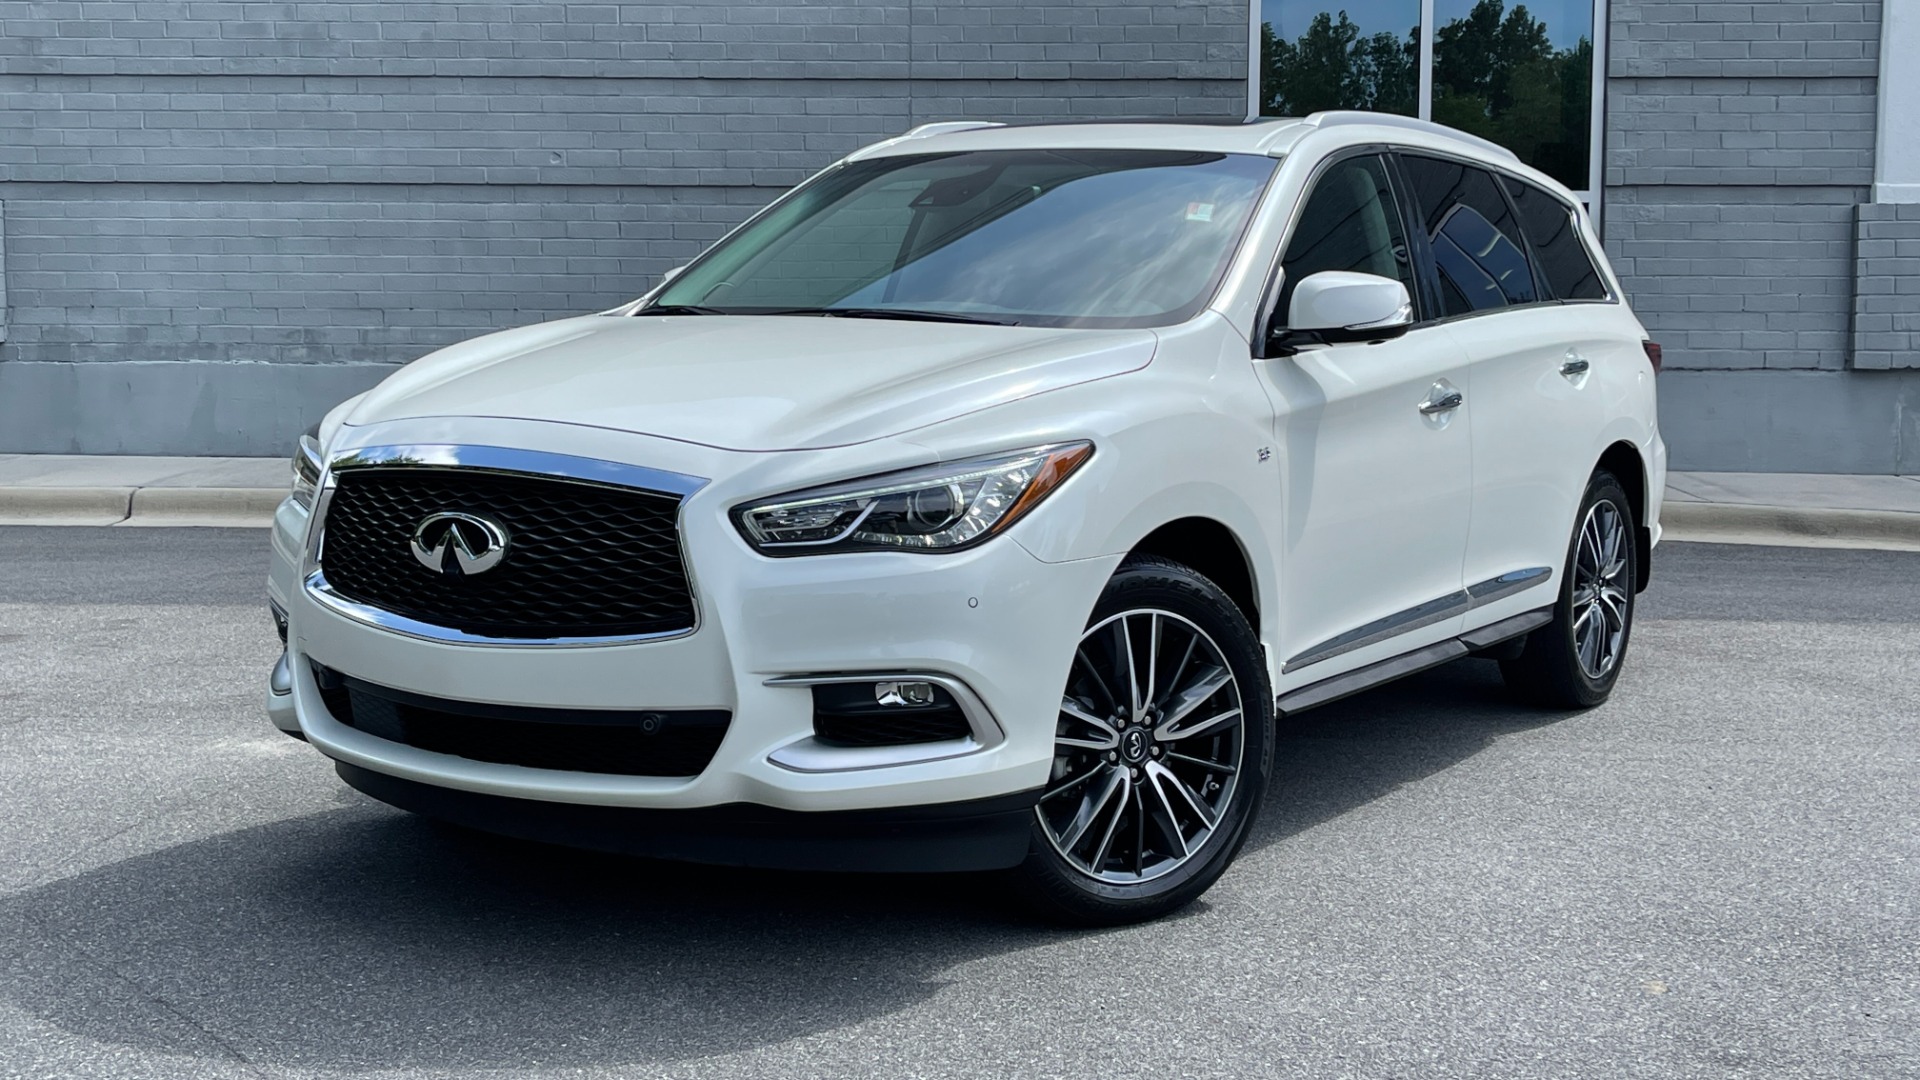 Used 2016 INFINITI QX60 AWD / DVD / 3RD ROW SEATS / DELUXE TECH for sale $27,999 at Formula Imports in Charlotte NC 28227 1